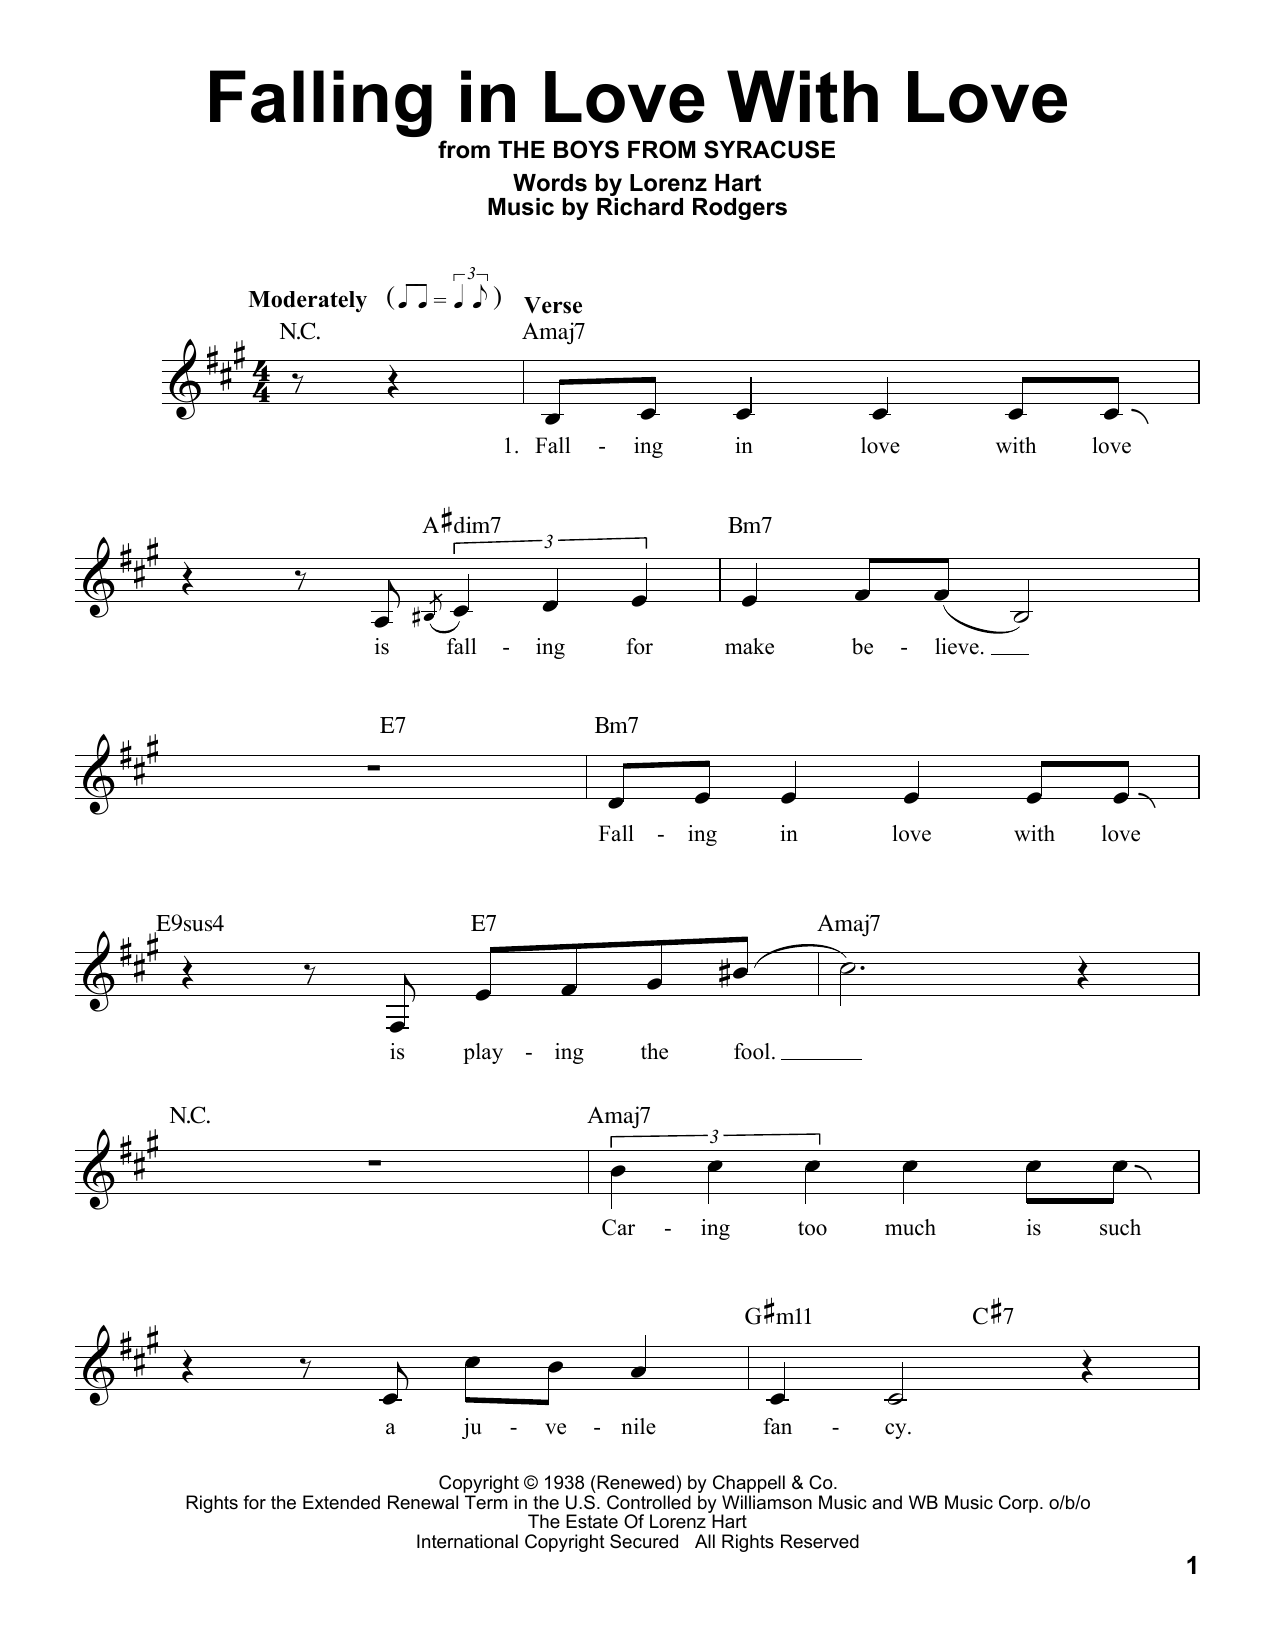 Download Rodgers & Hart Falling In Love With Love Sheet Music